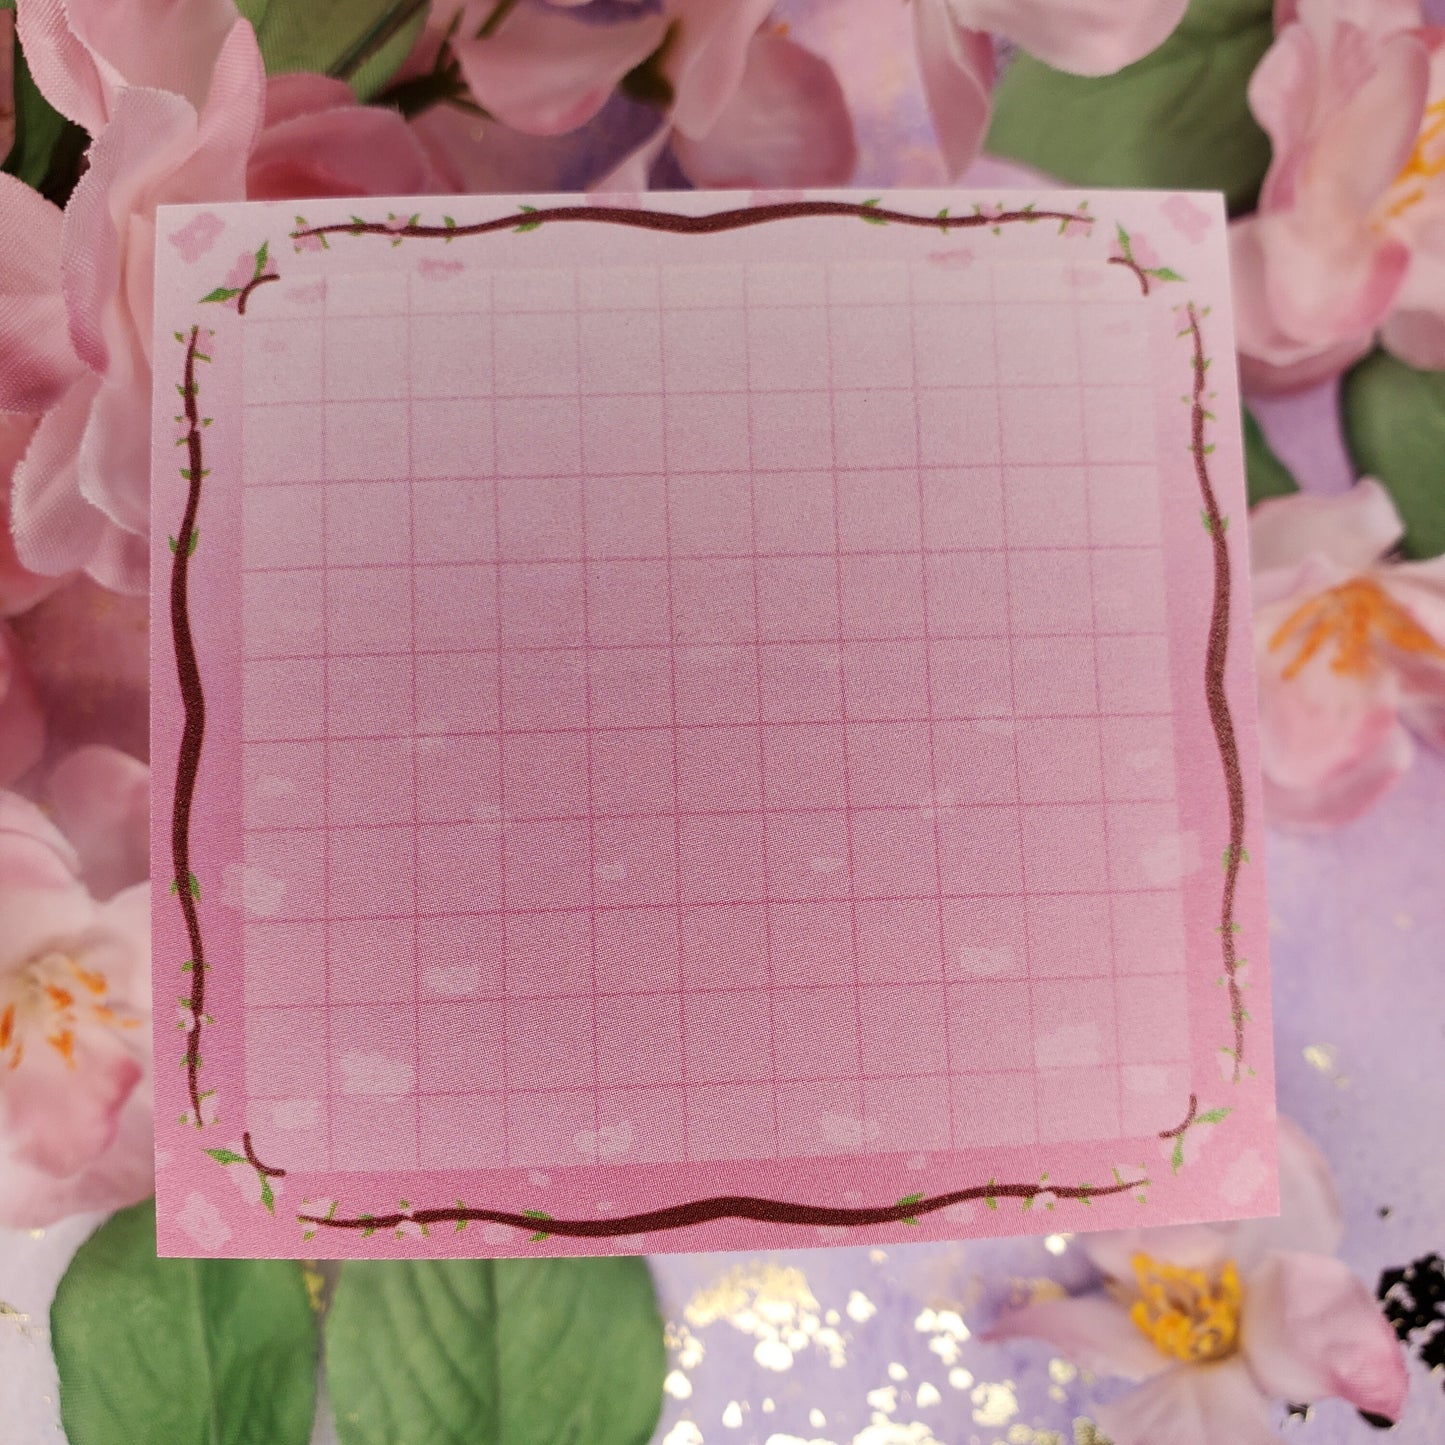 Cute Pink Cherry Blossom Branch 3x3 inch Grid Sticky Note Pad with 50 Sheets